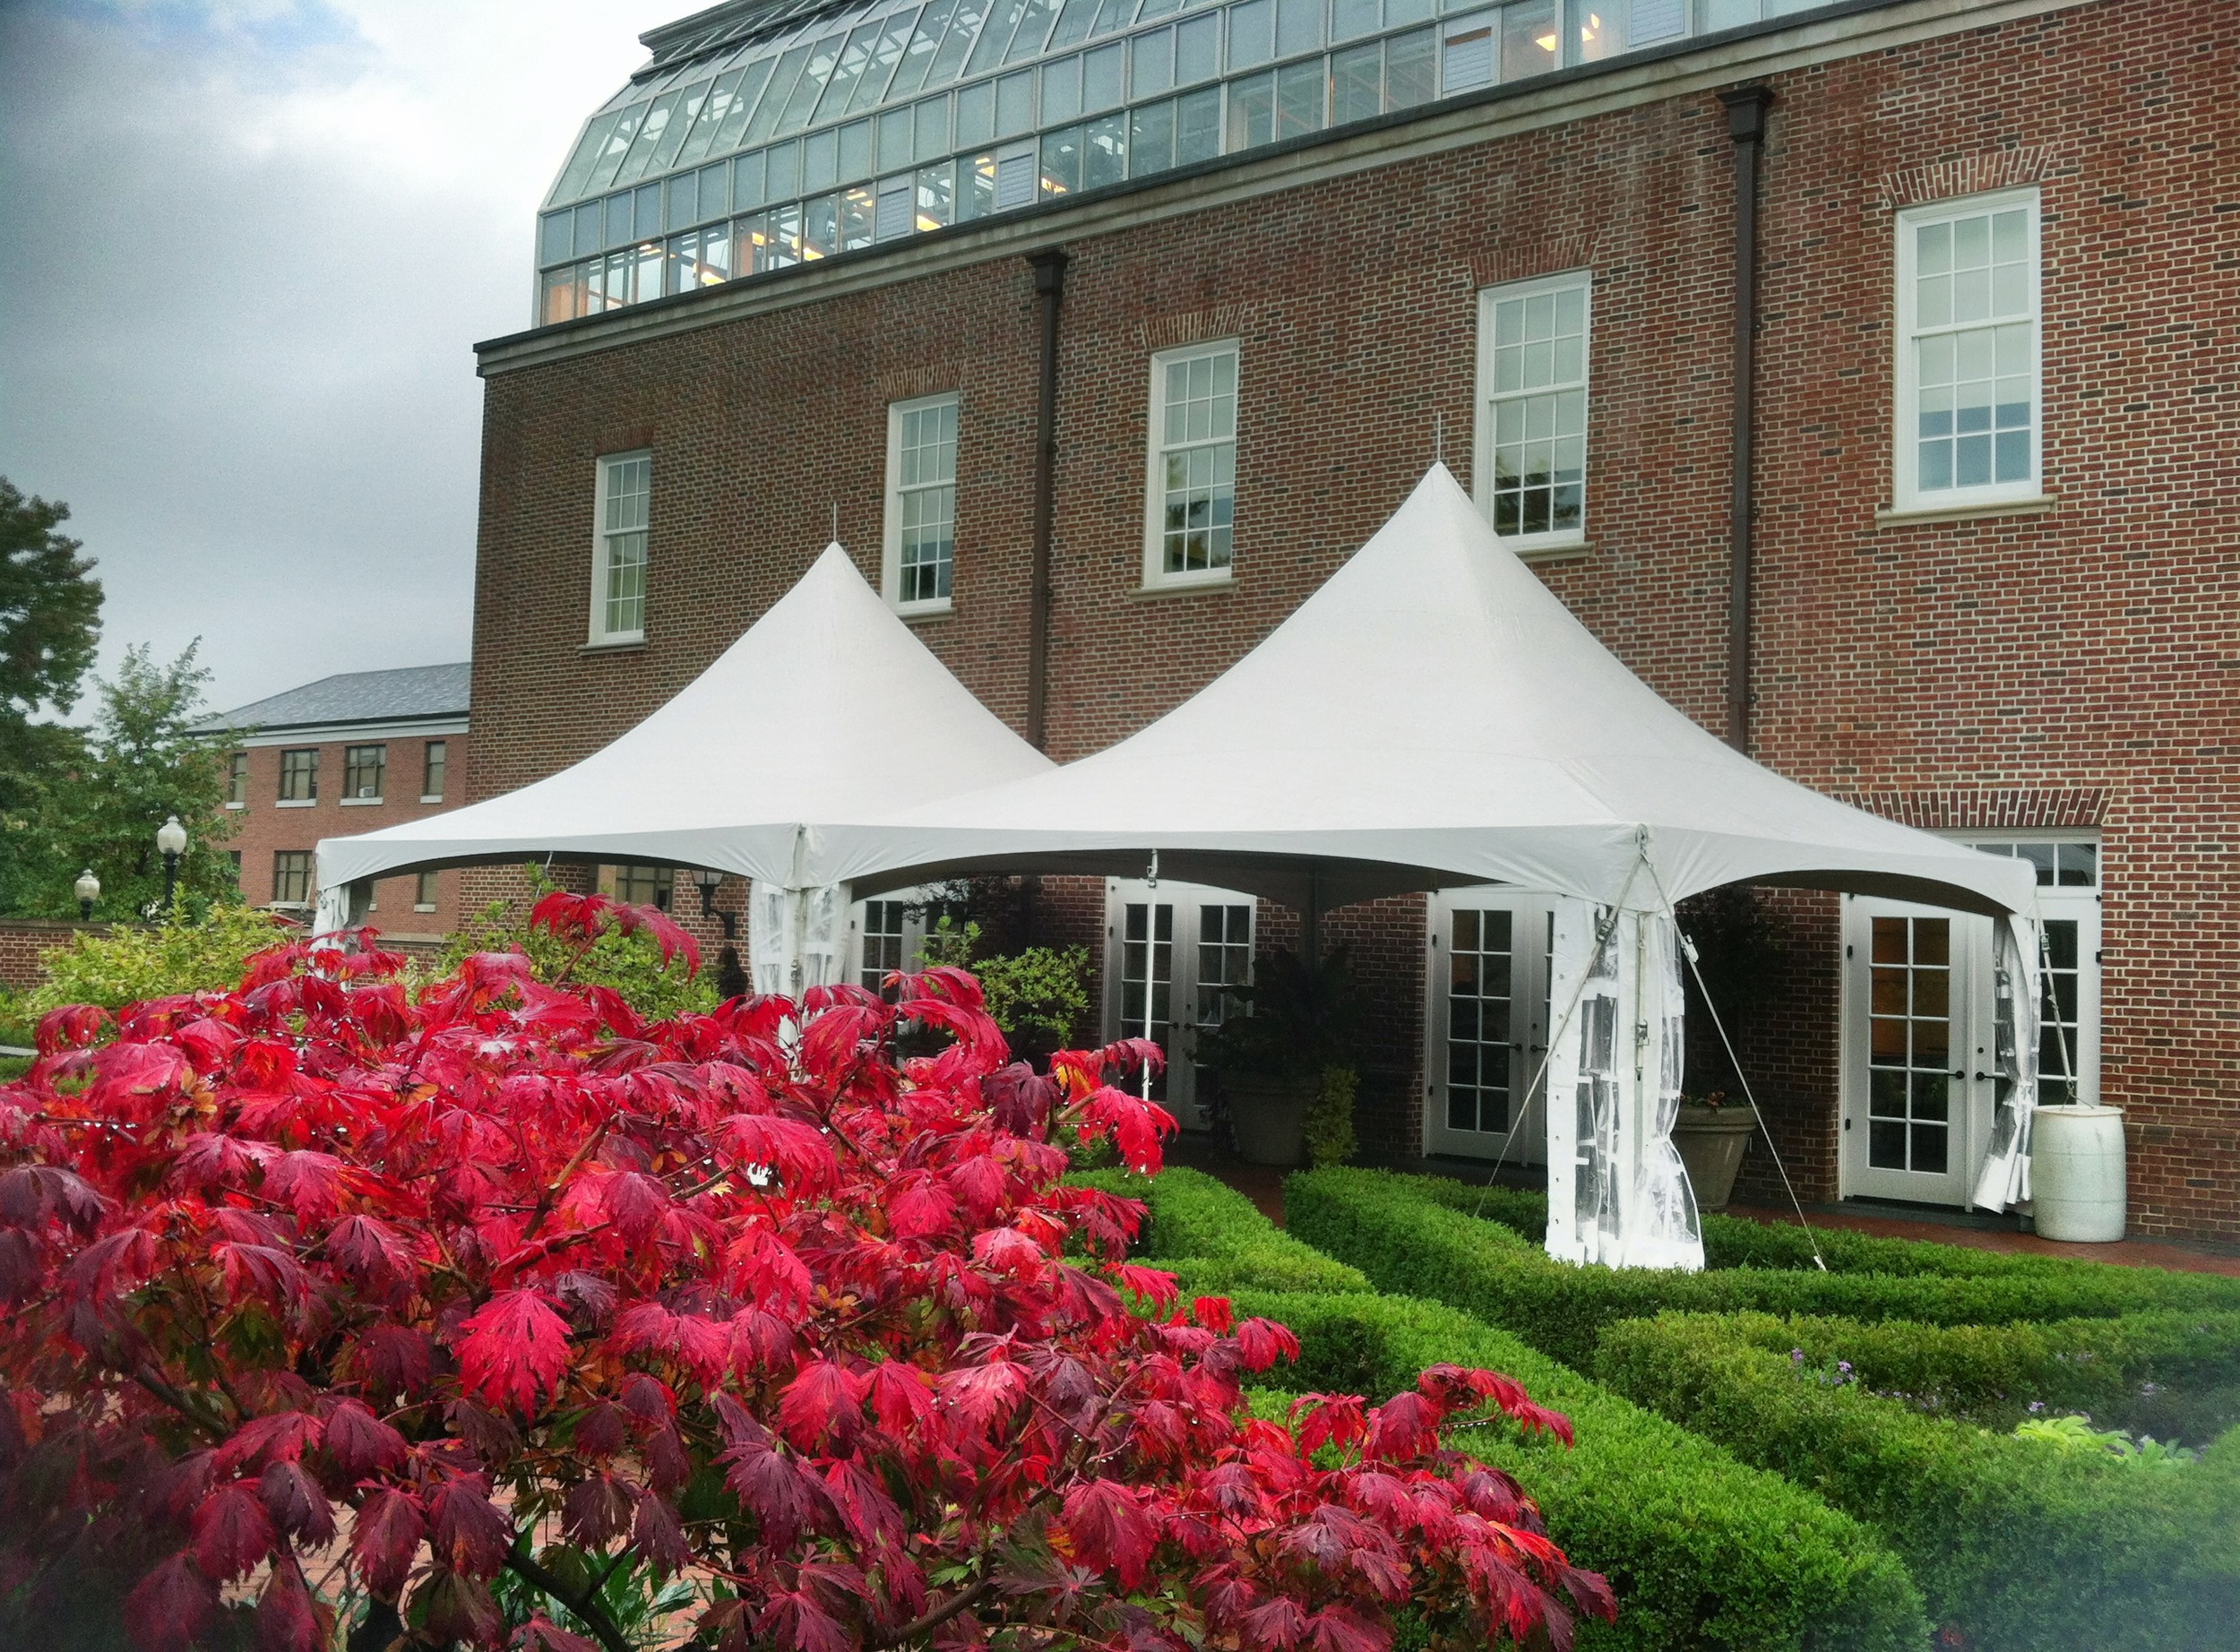 Both small and large tents are available for rental